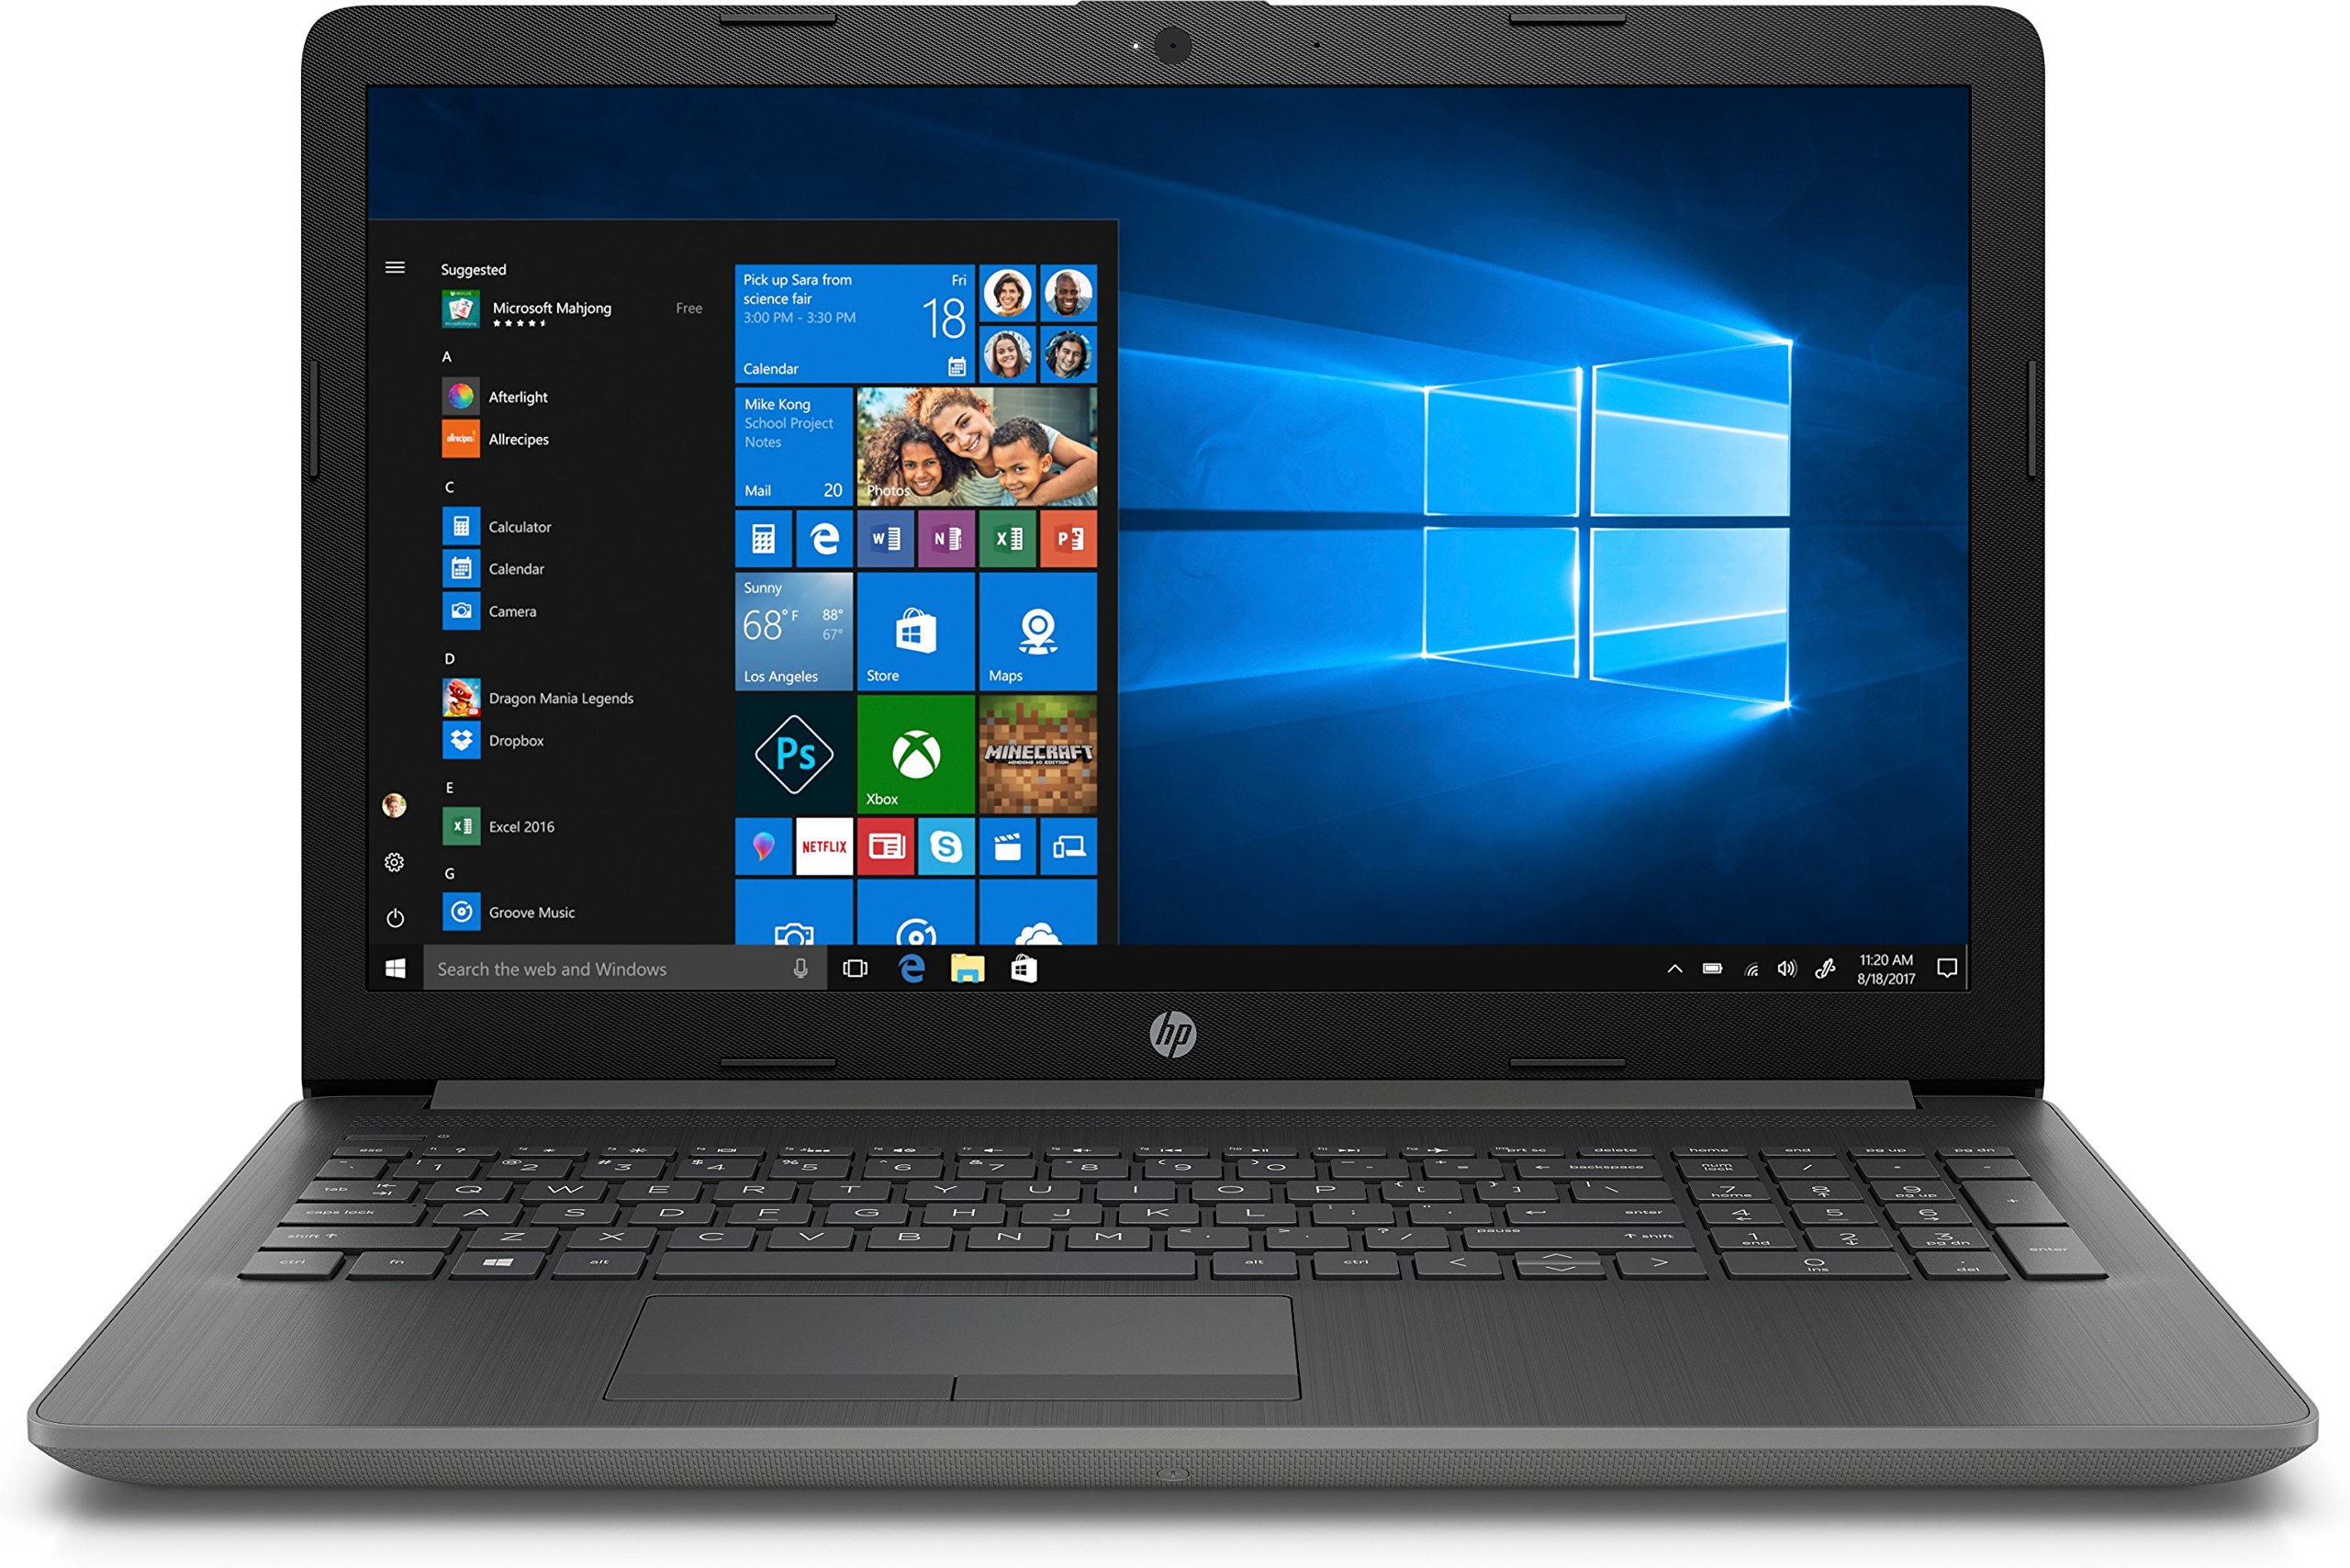 Book Cover HP Pavilion 15.6 HD 2019 Newest Touchscreen Laptop Notebook Computer, Intel Pentium N5000, 8GB RAM, 1TB HDD, Bluetooth, Webcam, HDMI, Win 10 w/ USB Extension Cord, Mouse Pad and HDMI Cable